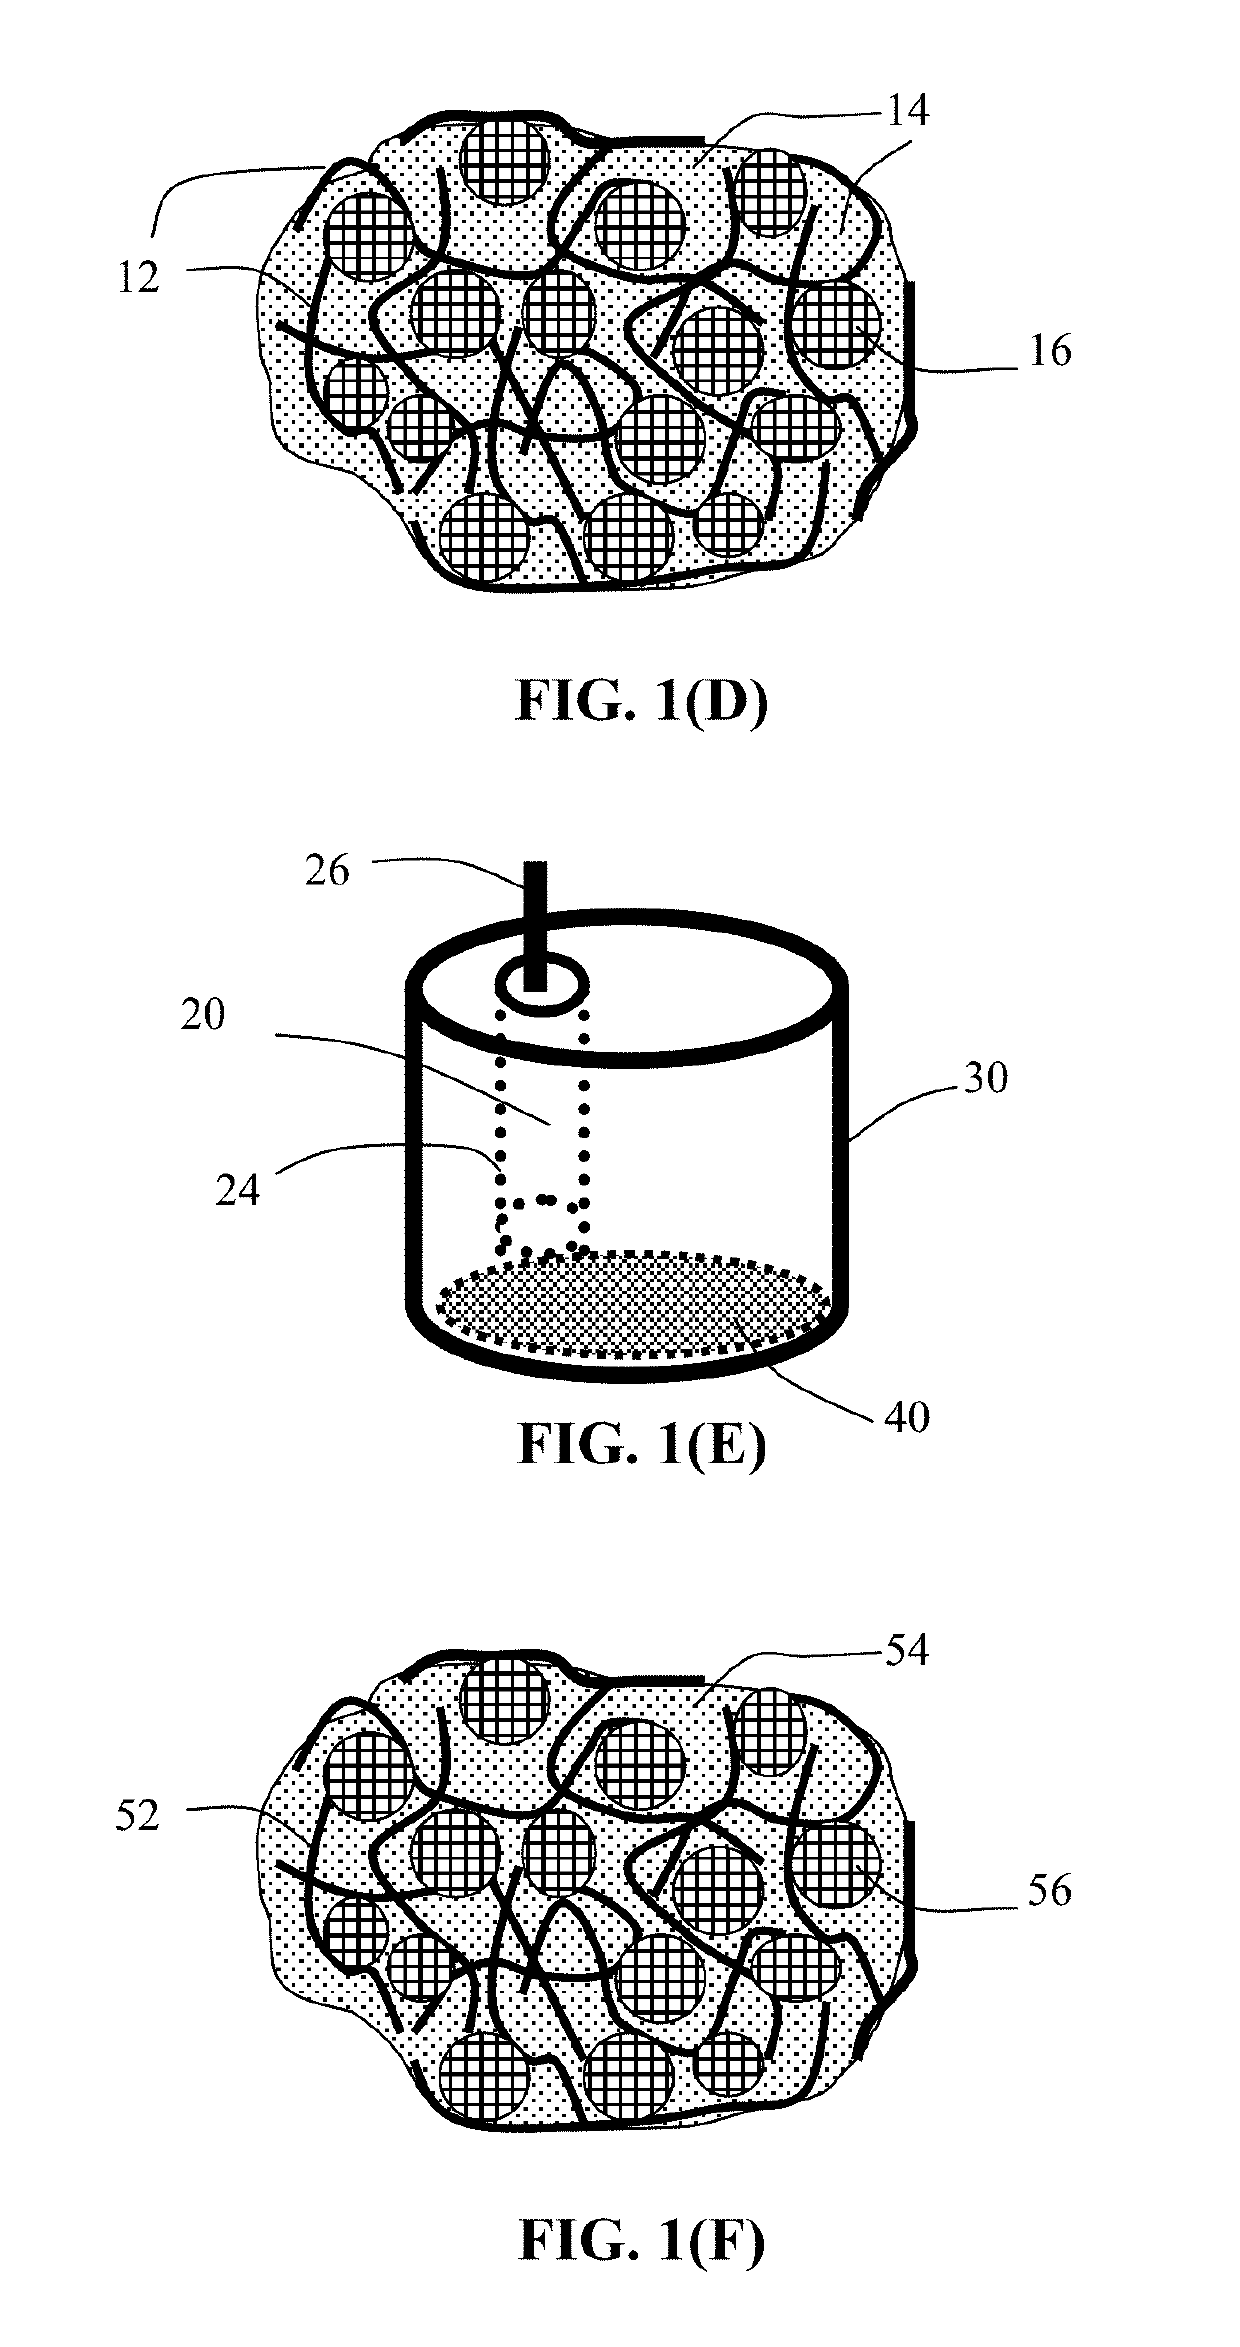 Method of Producing Anode or Cathode Participates for Alkali Metal Batteries